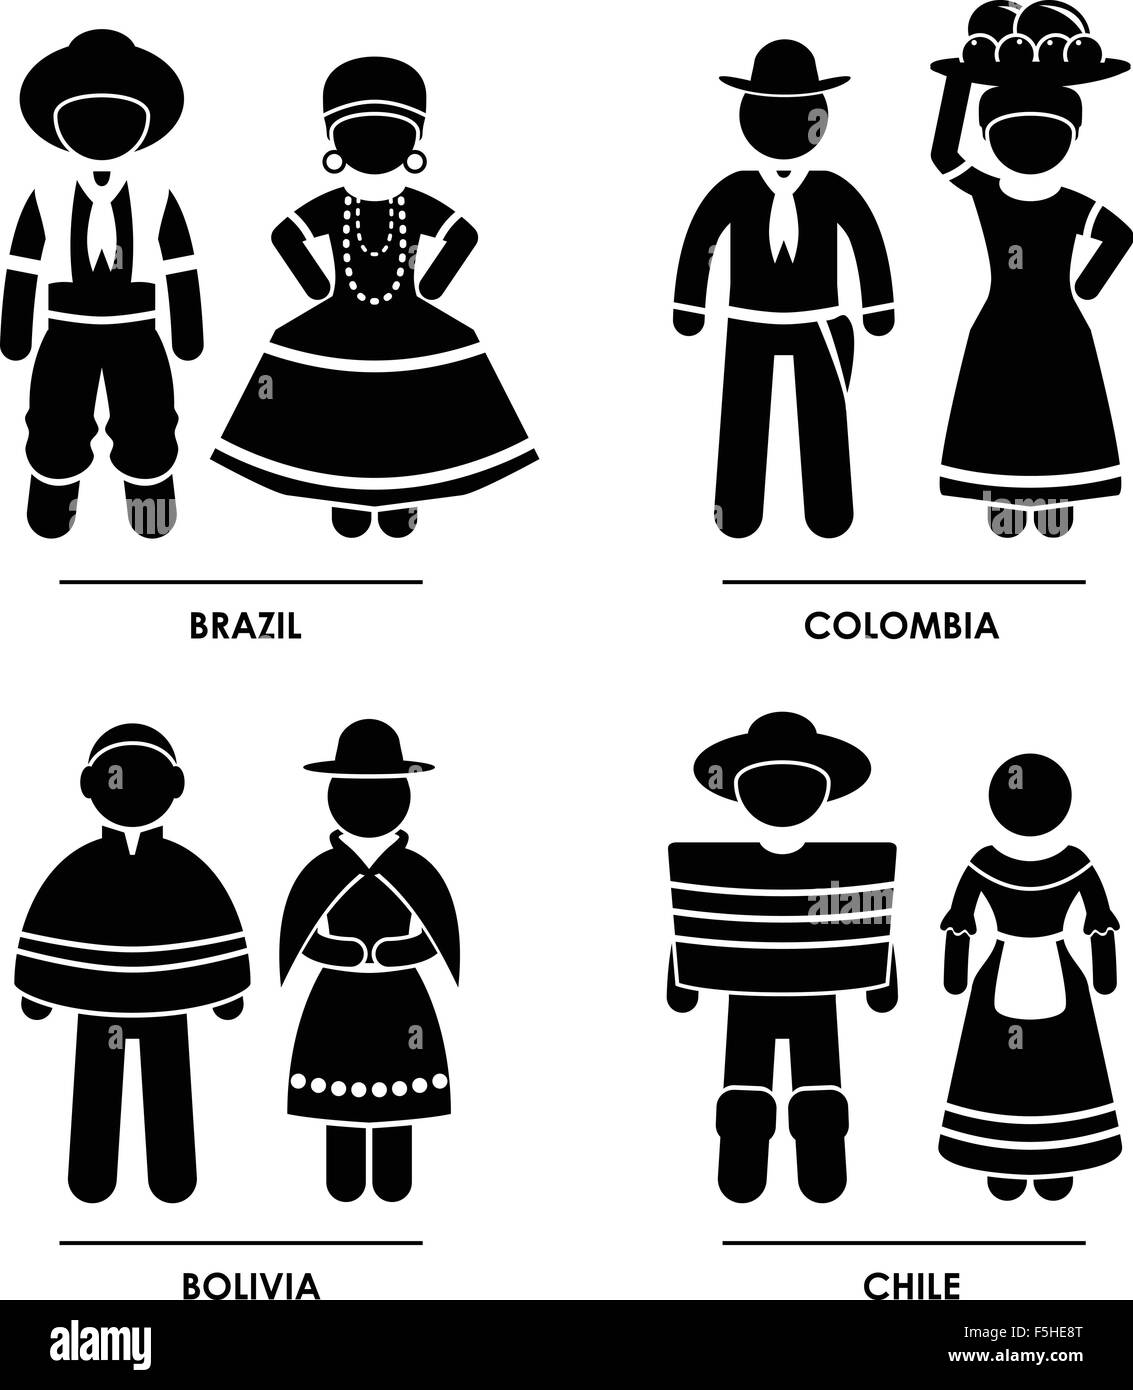 South America - Brazil Colombia Bolivia Chile Man Woman National Traditional Costume Dress Clothing Icon Symbol Sign Pictogram Stock Vector